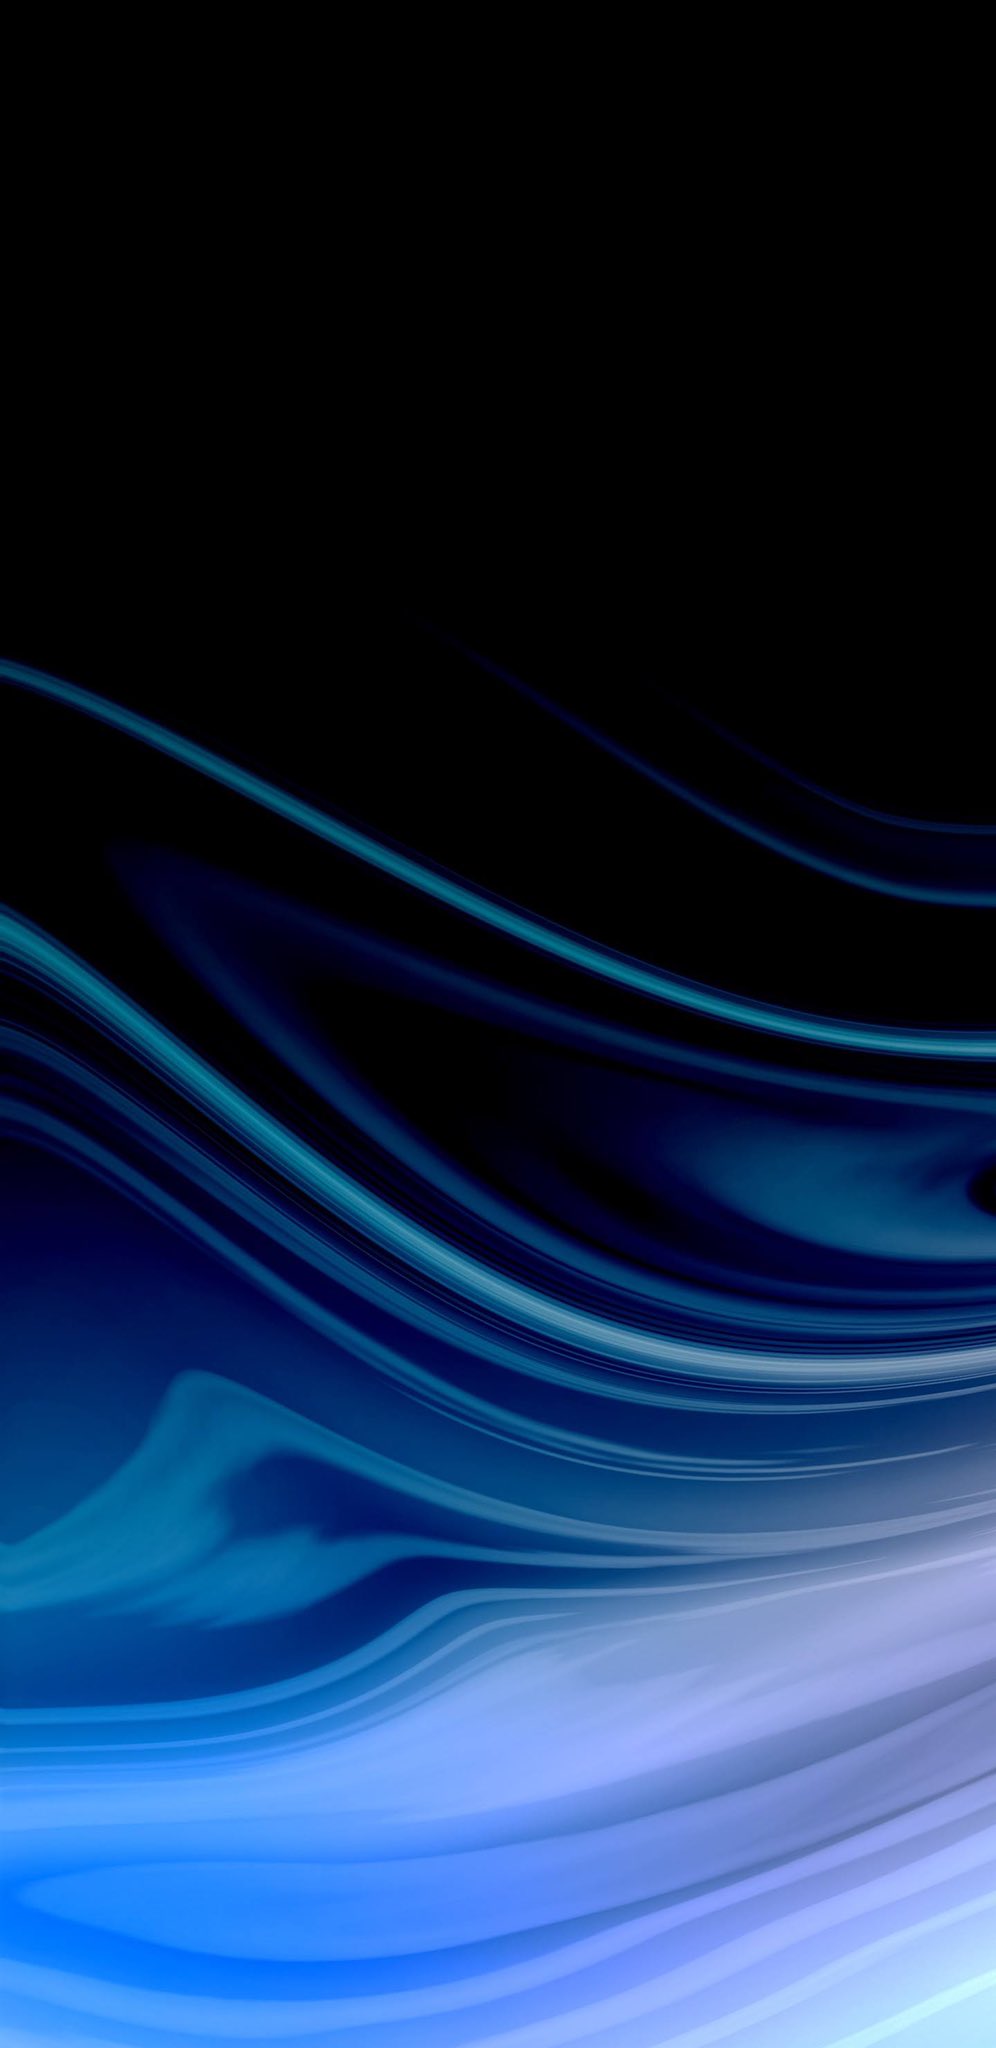 black and blue iphone wallpaper